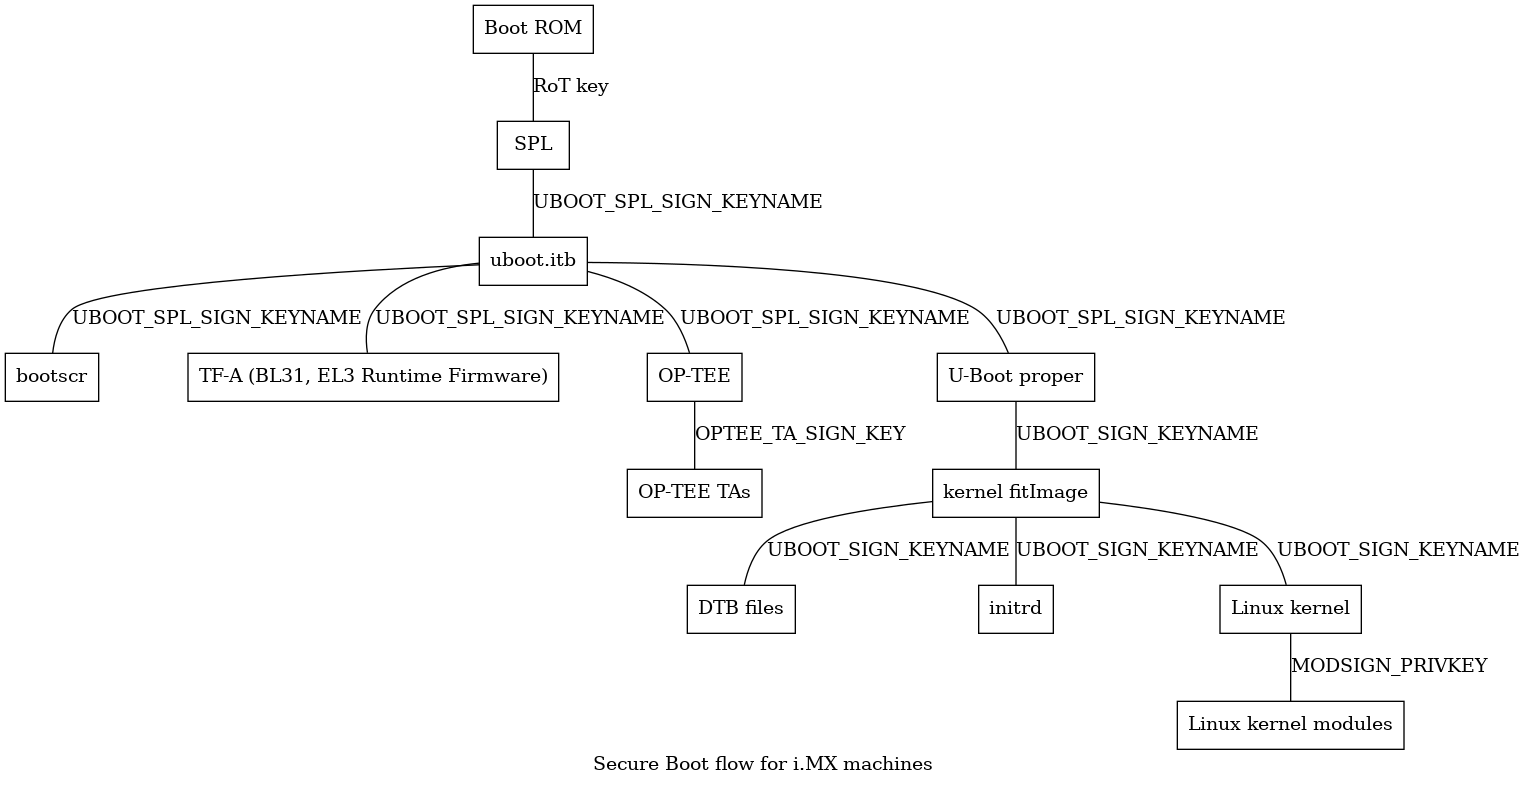 digraph {
     graph [
         label = "Secure Boot flow for i.MX machines"
     ];
     node [
         shape=box
     ];
     edge [
         arrowhead=none
     ];
     "Boot ROM"        -> "SPL"                               [label = "RoT key"];
     "SPL"             -> "uboot.itb"                         [label = "UBOOT_SPL_SIGN_KEYNAME"];
     "uboot.itb"       -> "bootscr"                           [label = "UBOOT_SPL_SIGN_KEYNAME"];
     "uboot.itb"       -> "TF-A (BL31, EL3 Runtime Firmware)" [label = "UBOOT_SPL_SIGN_KEYNAME"];
     "uboot.itb"       -> "OP-TEE"                            [label = "UBOOT_SPL_SIGN_KEYNAME"];
     "OP-TEE"          -> "OP-TEE TAs"                        [label = "OPTEE_TA_SIGN_KEY"];
     "uboot.itb"       -> "U-Boot proper"                     [label = "UBOOT_SPL_SIGN_KEYNAME"];
     "U-Boot proper"   -> "kernel fitImage"                   [label = "UBOOT_SIGN_KEYNAME"];
     "kernel fitImage" -> "DTB files"                         [label = "UBOOT_SIGN_KEYNAME"];
     "kernel fitImage" -> "initrd"                            [label = "UBOOT_SIGN_KEYNAME"];
     "kernel fitImage" -> "Linux kernel"                      [label = "UBOOT_SIGN_KEYNAME"];
     "Linux kernel"    -> "Linux kernel modules"              [label = "MODSIGN_PRIVKEY"];
}